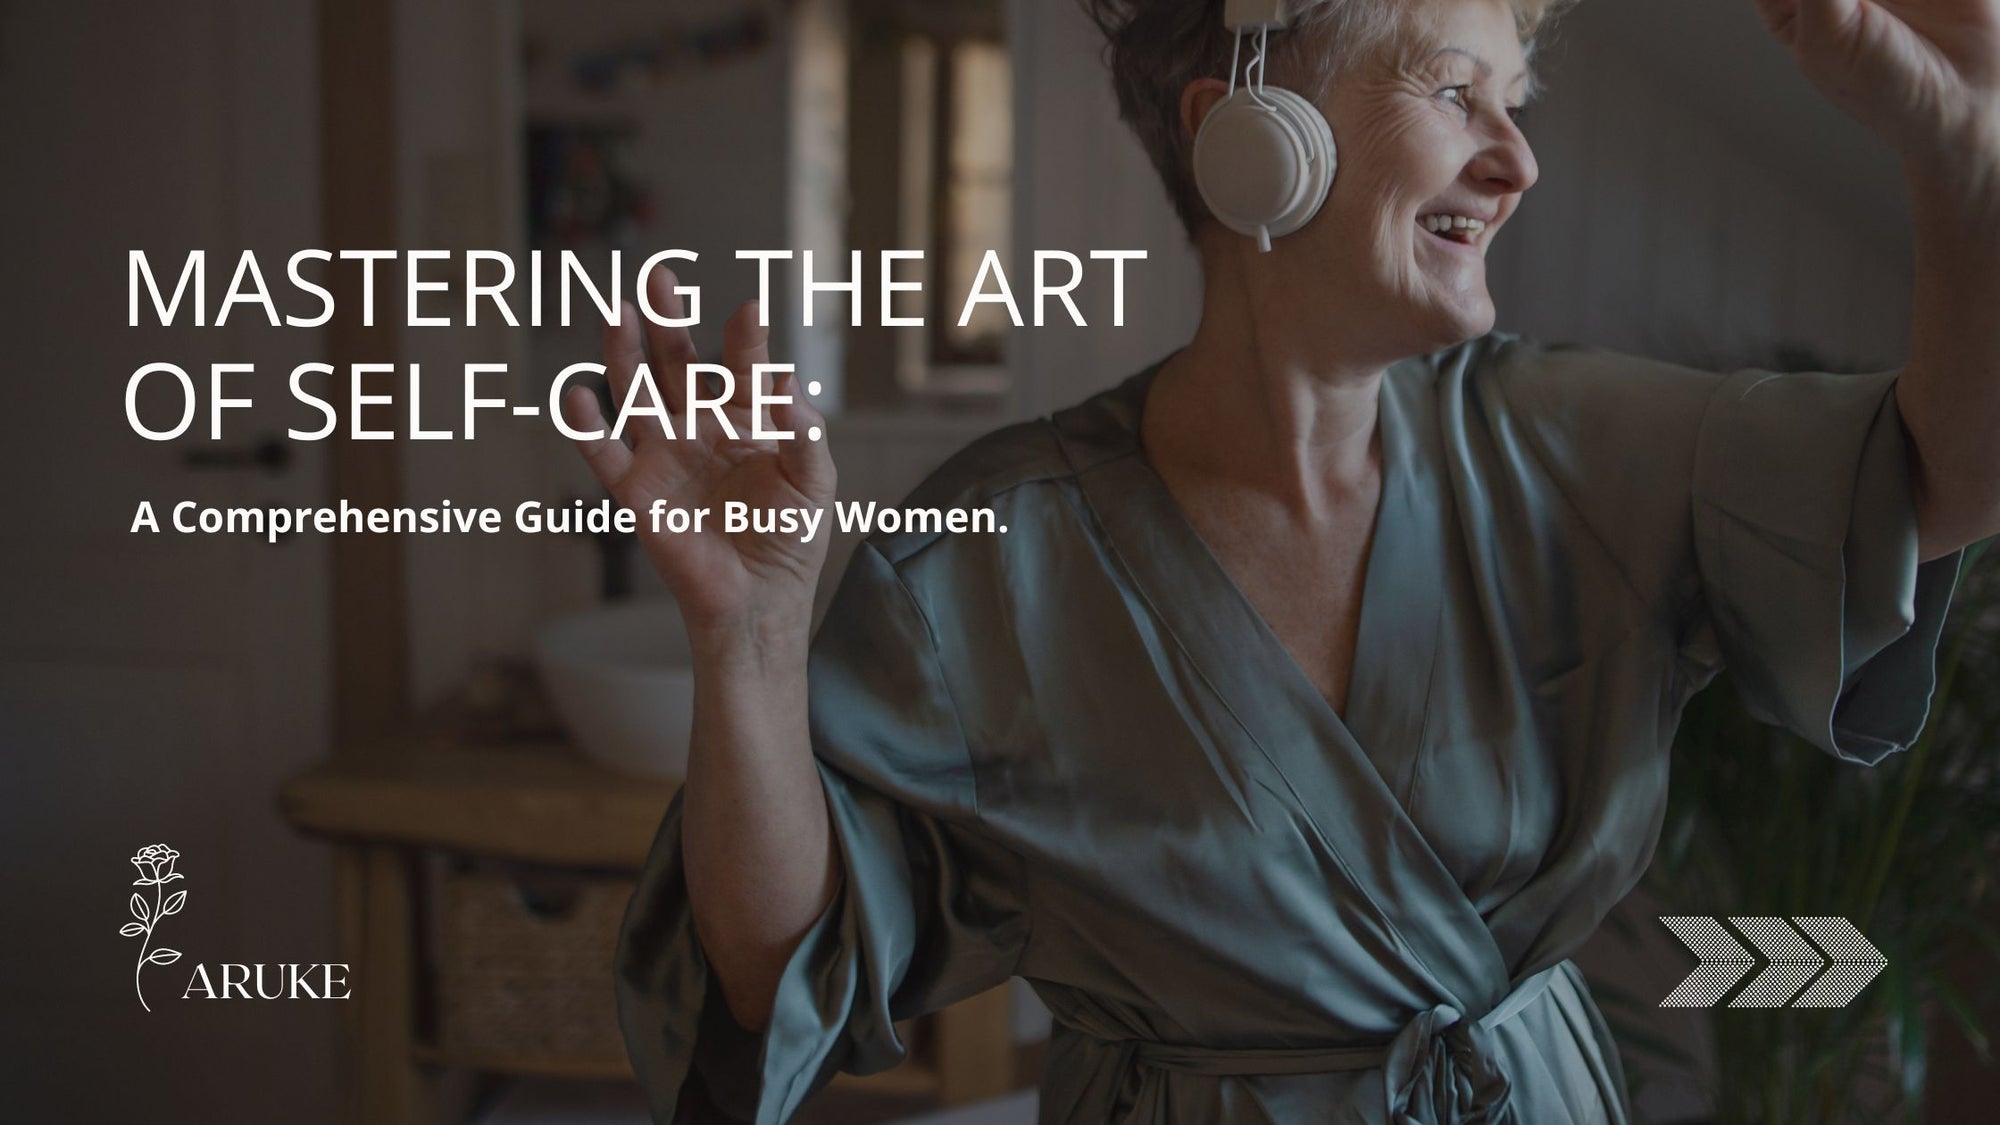 Mastering the Art of Self-Care: A Comprehensive Guide for Busy Women